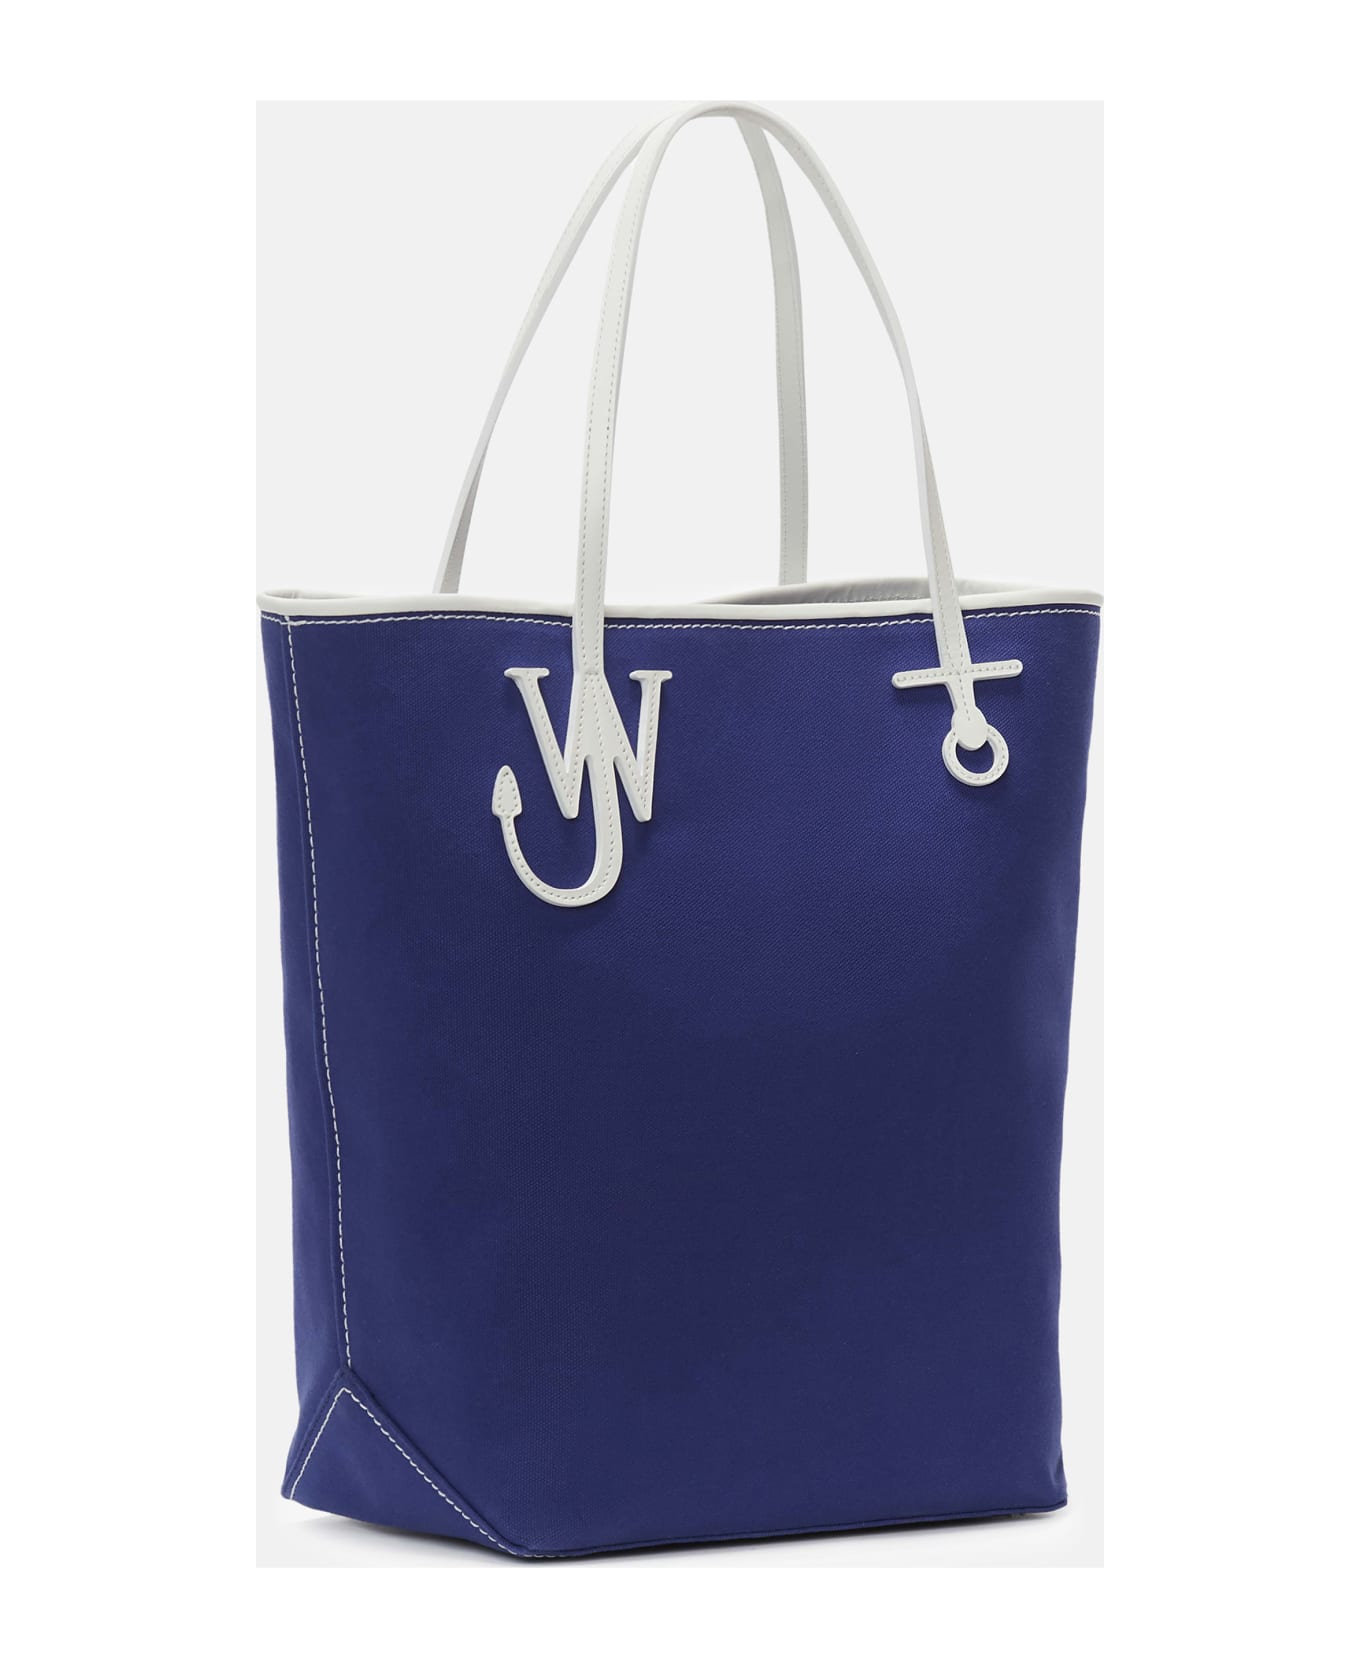 J.W. Anderson Anchor Tall Tote - BLUE/WHITE